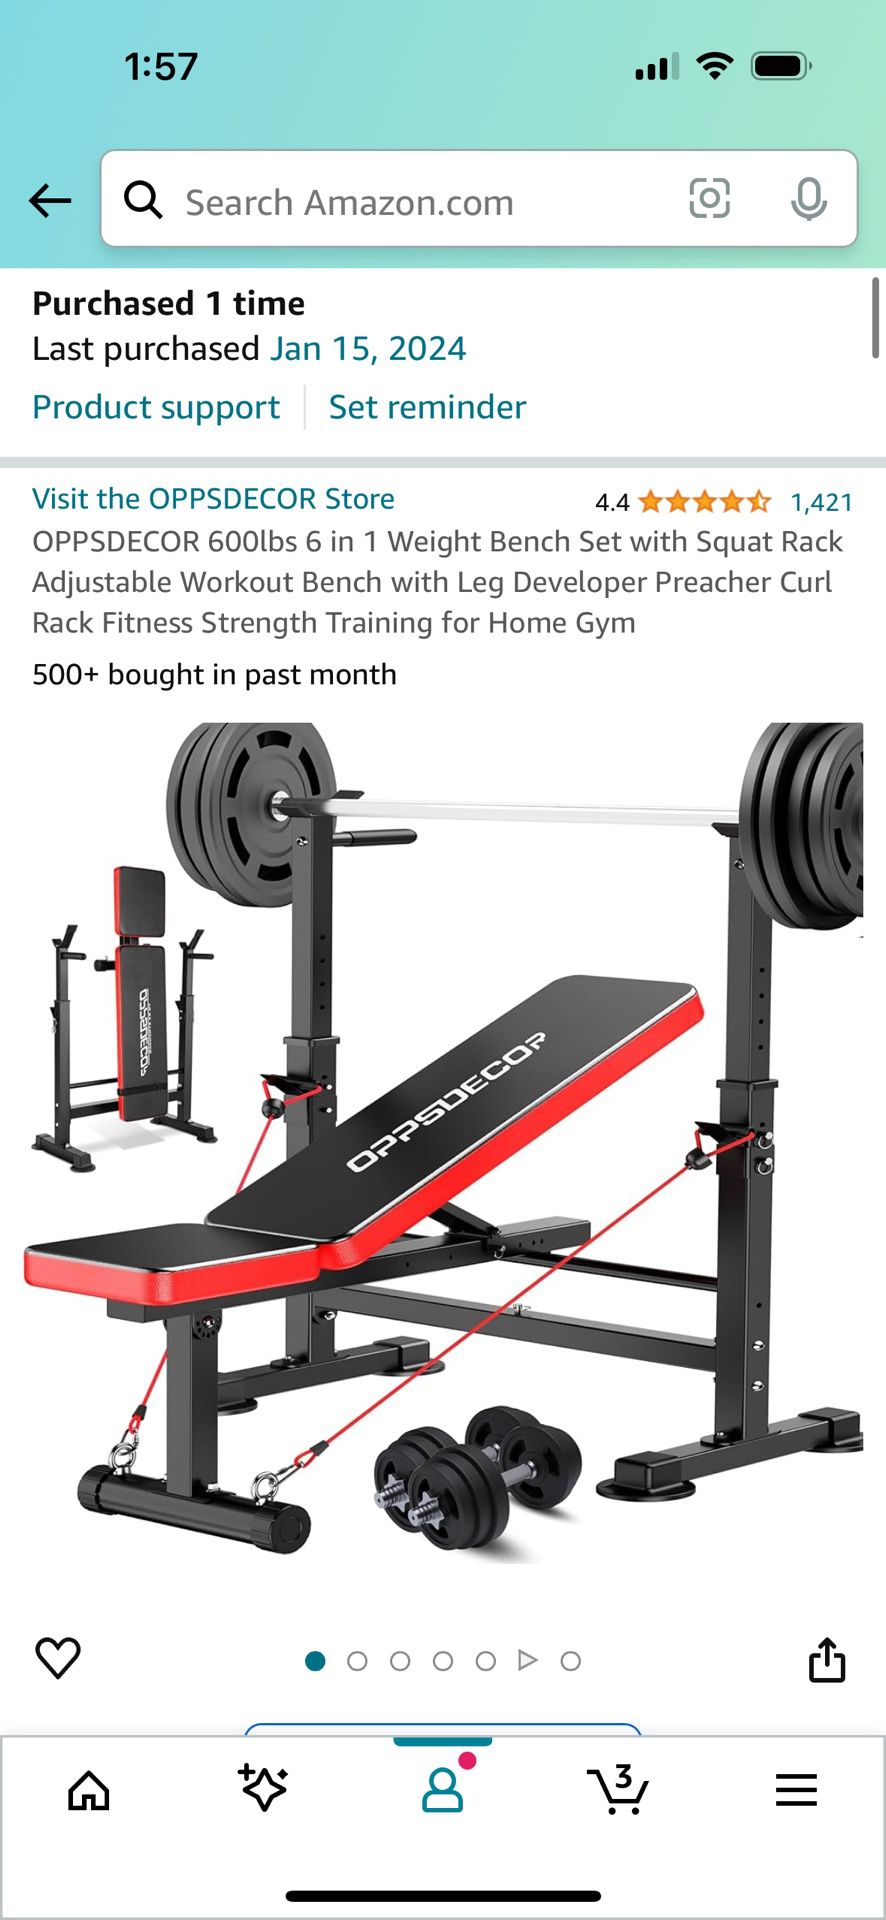 6 in 1 weight bench set with squat rack